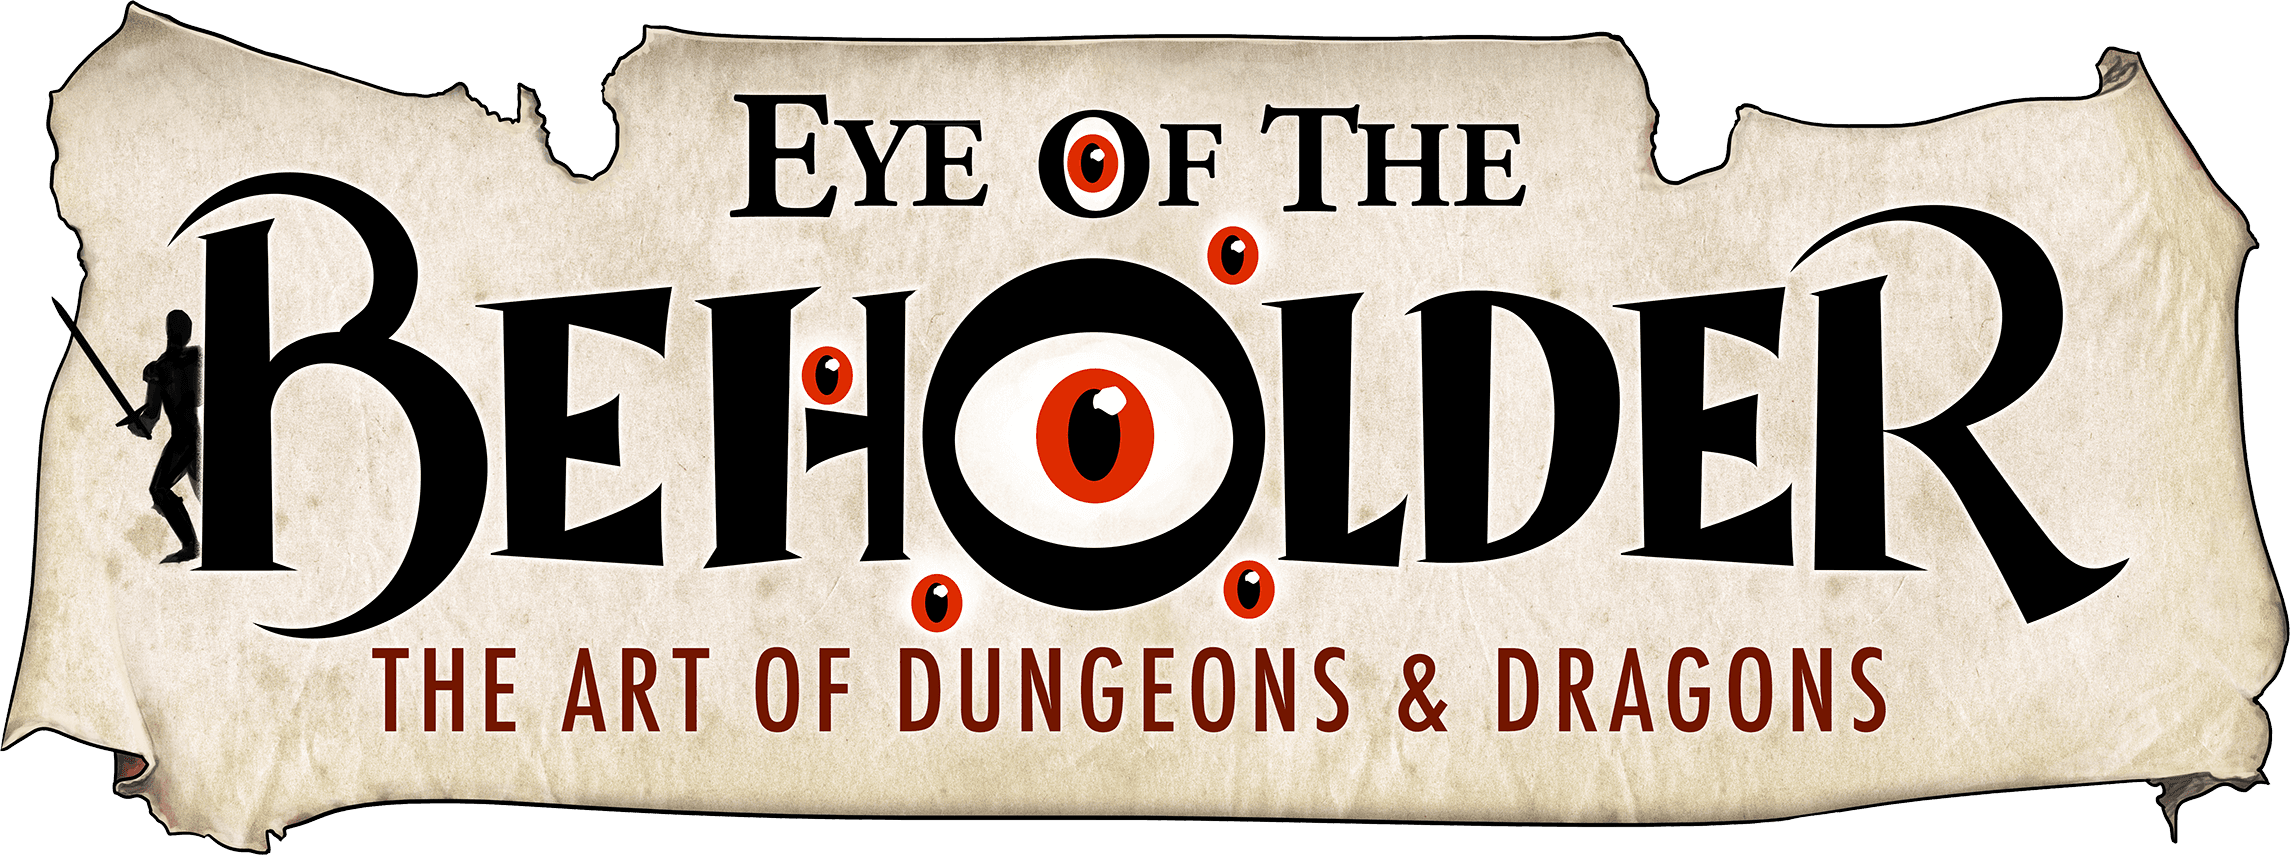 Eye of the Beholder: The Art of Dungeons & Dragons logo